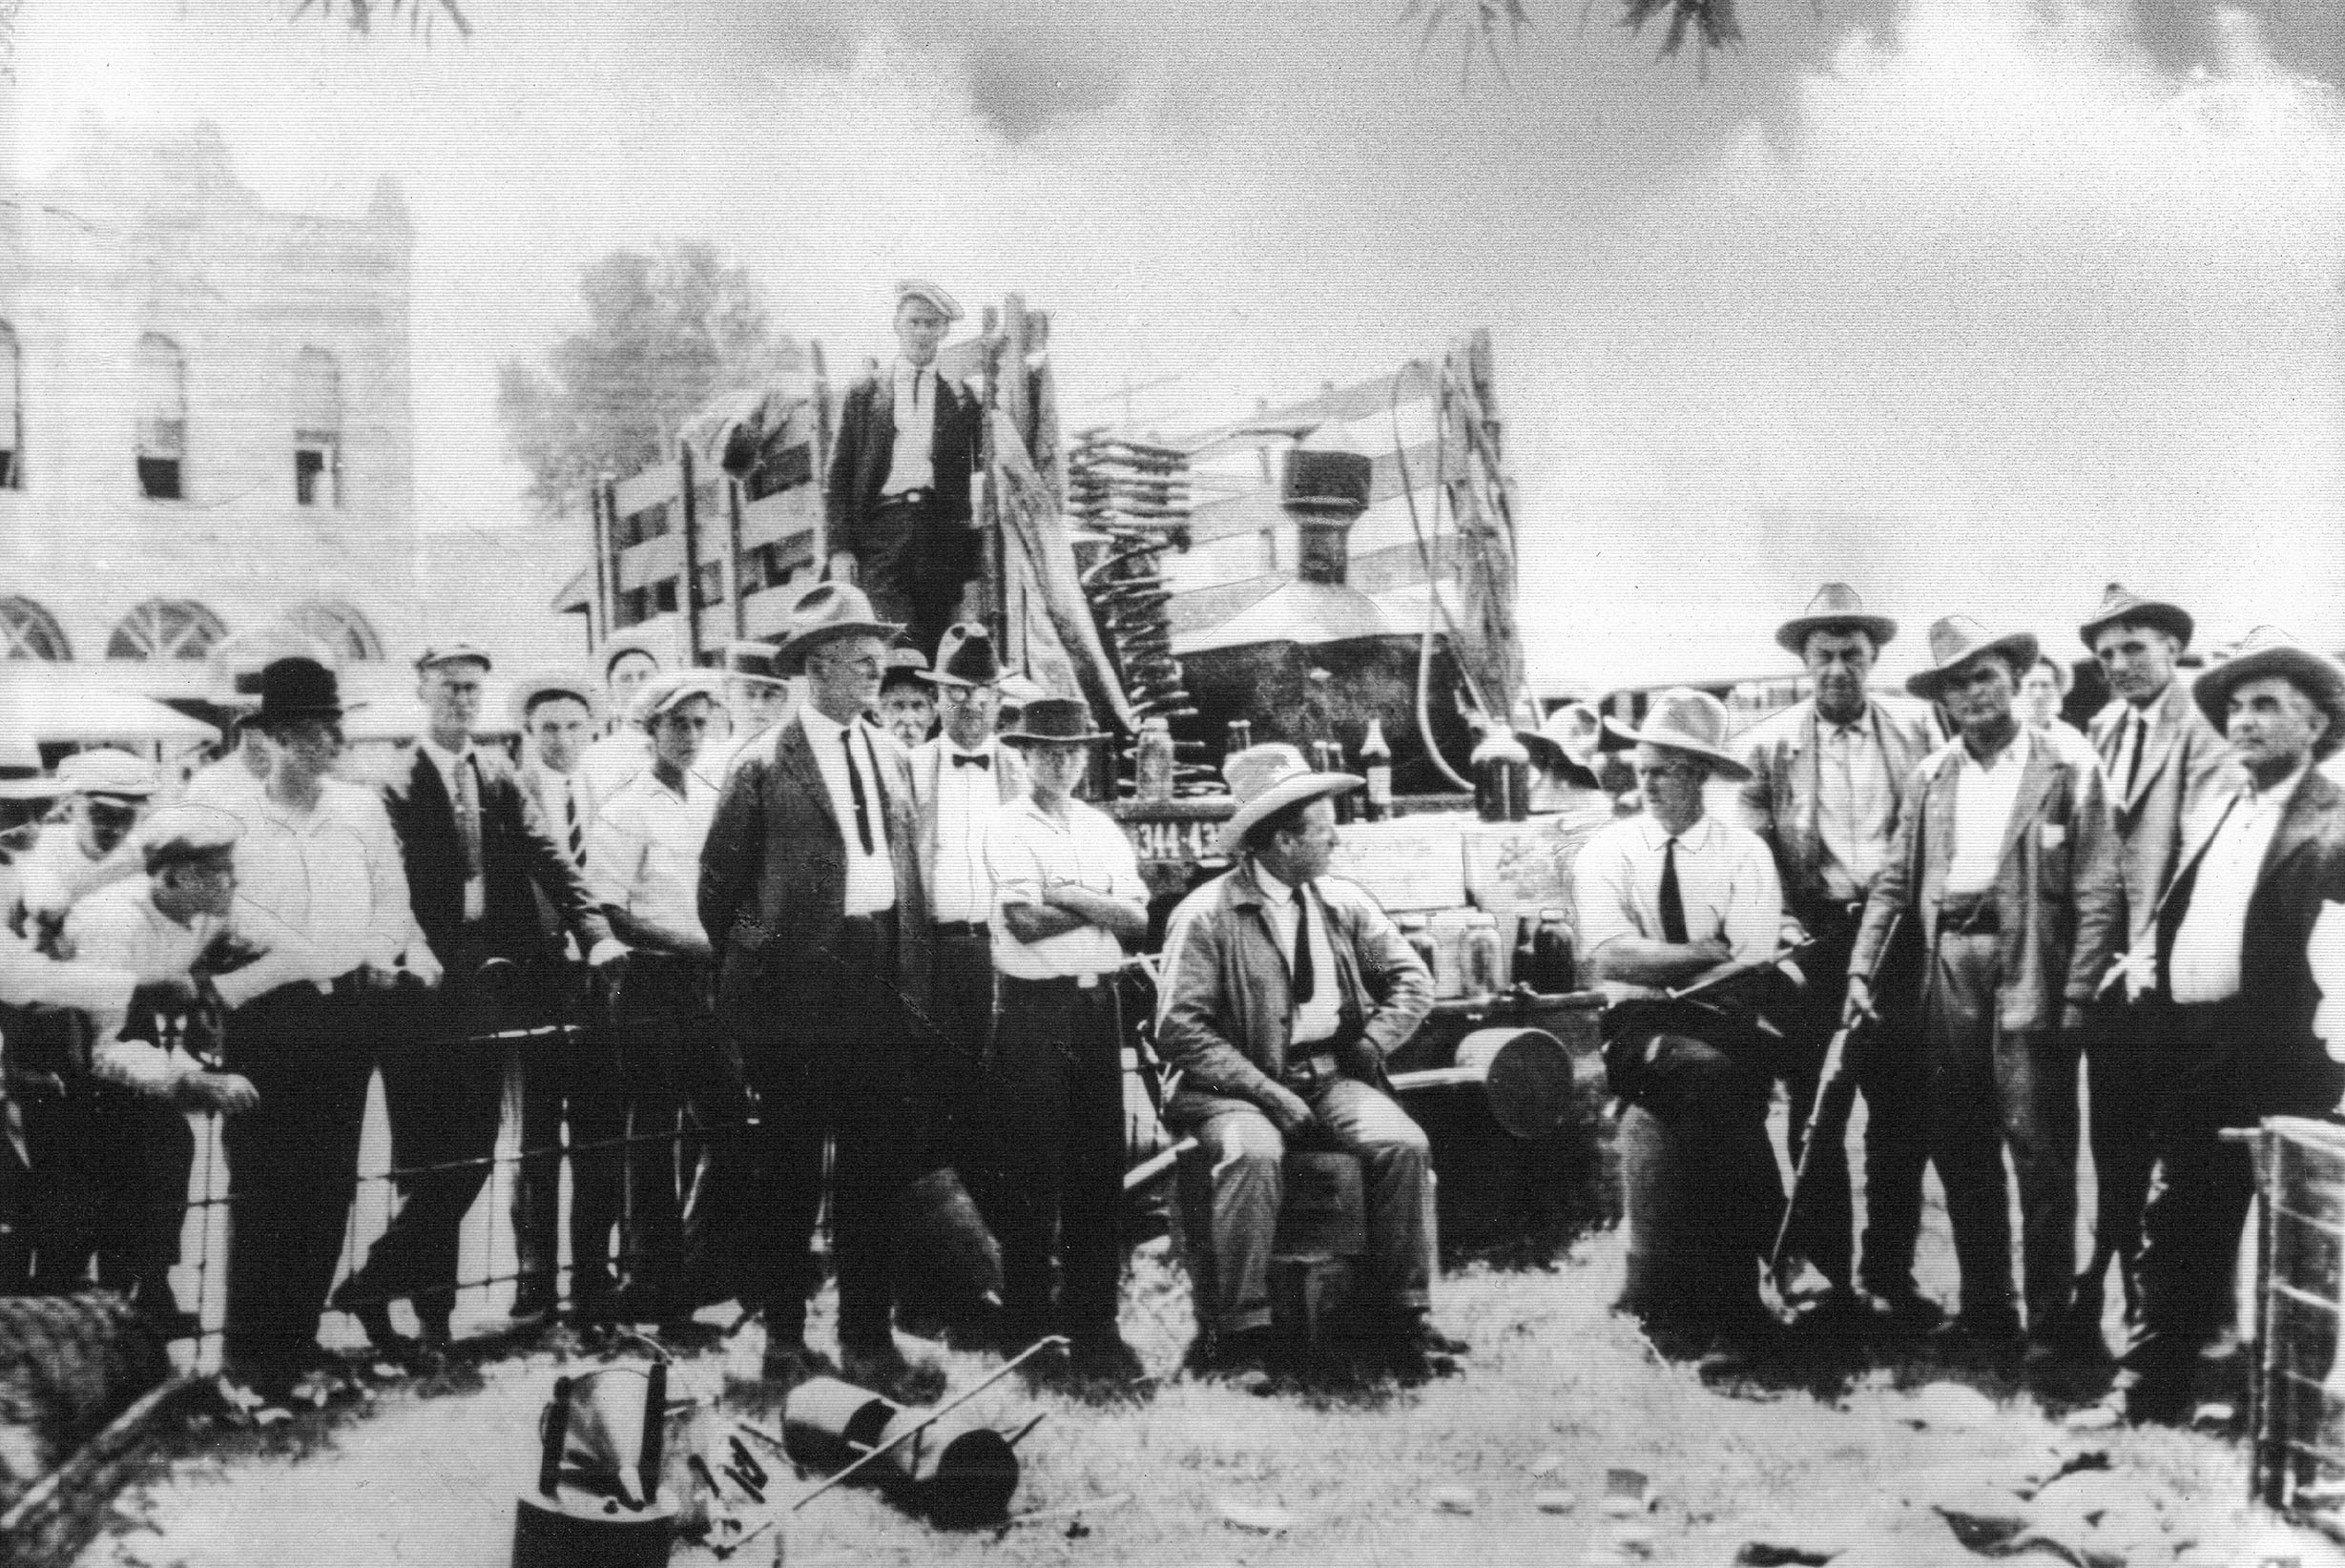 A black and white image of men standing around a truck filled with confiscated stills. 